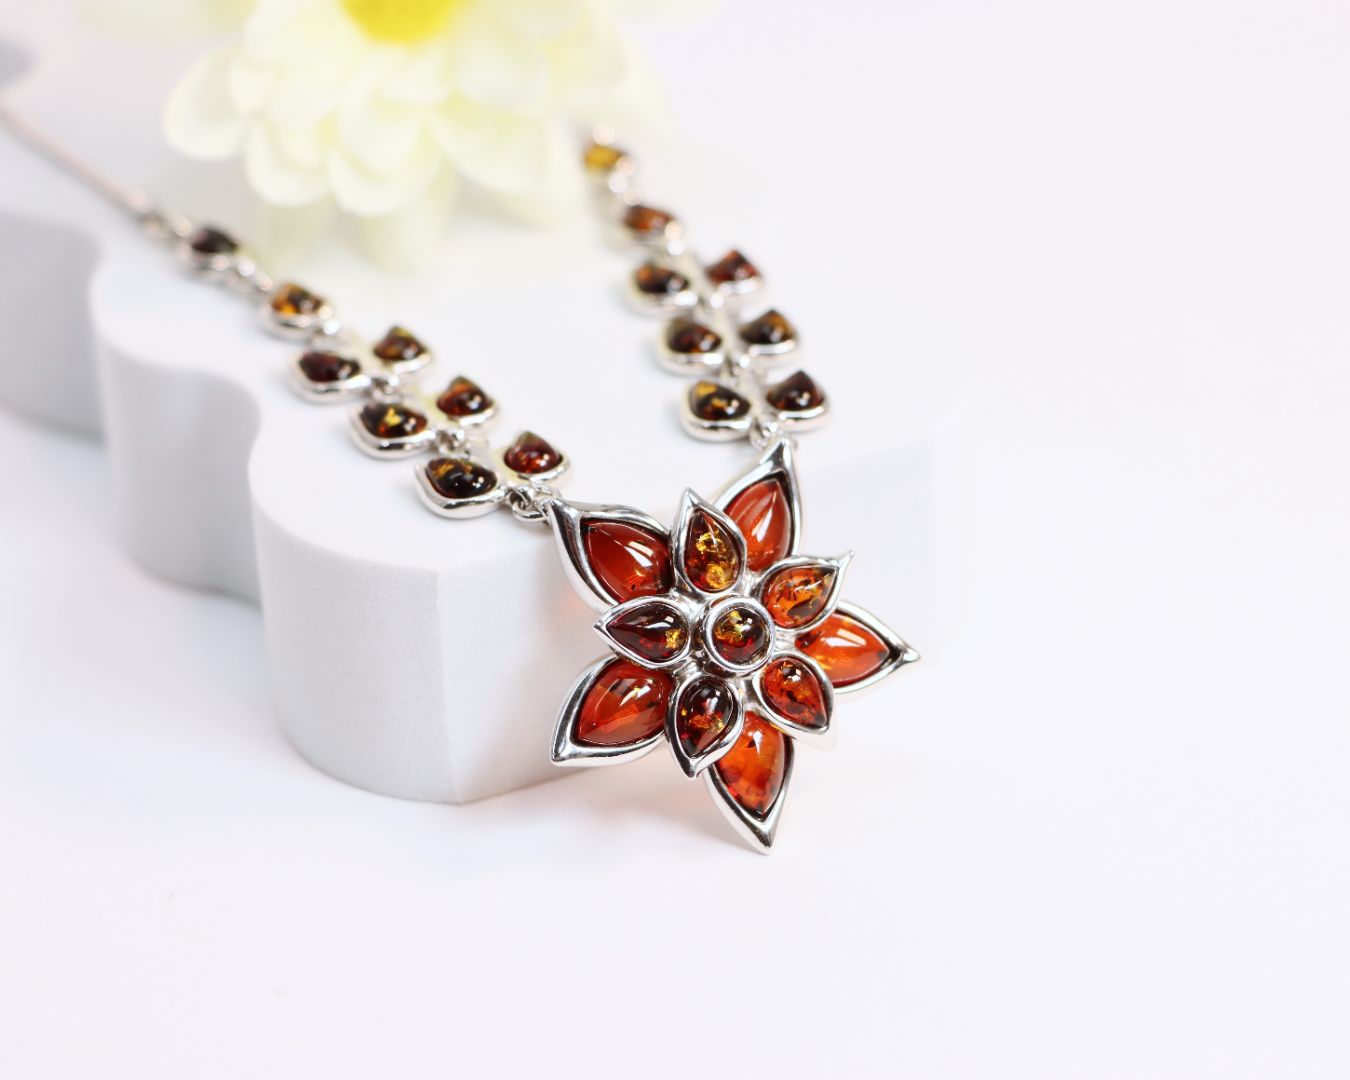 Natural Baltic Amber Floral Statement Necklace in 925 Sterling Silver